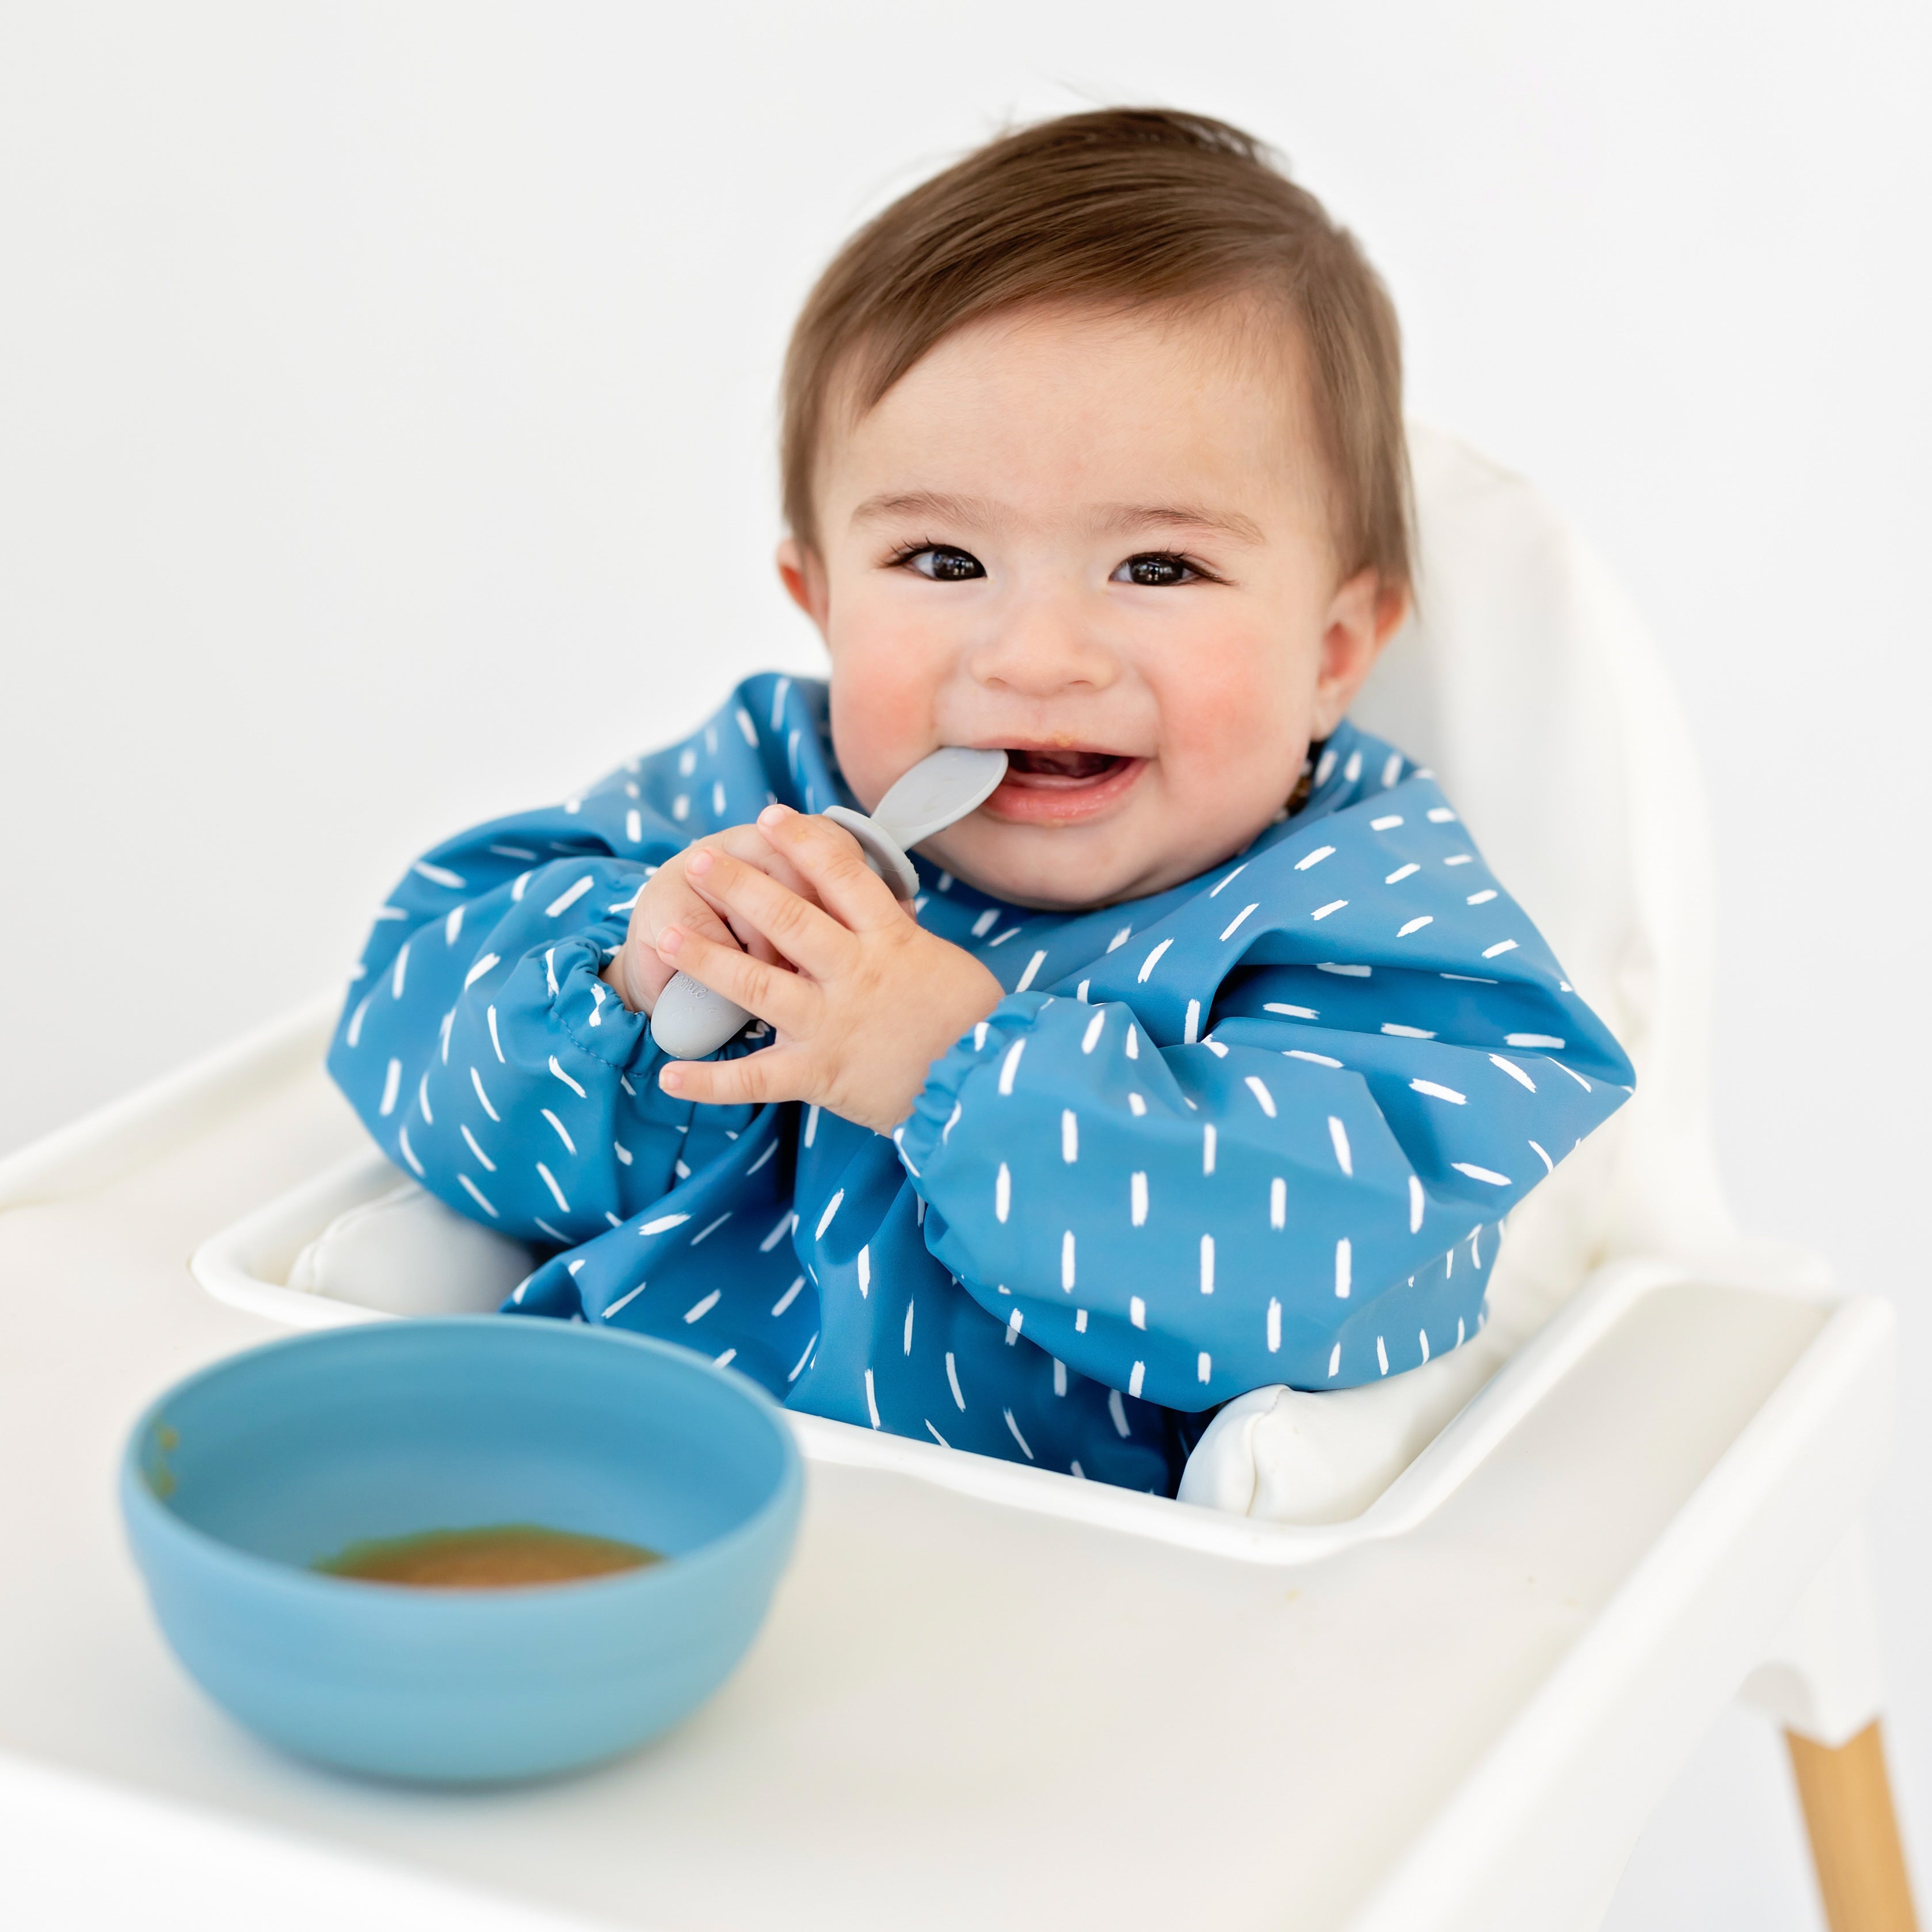 Baby eating with spoonie